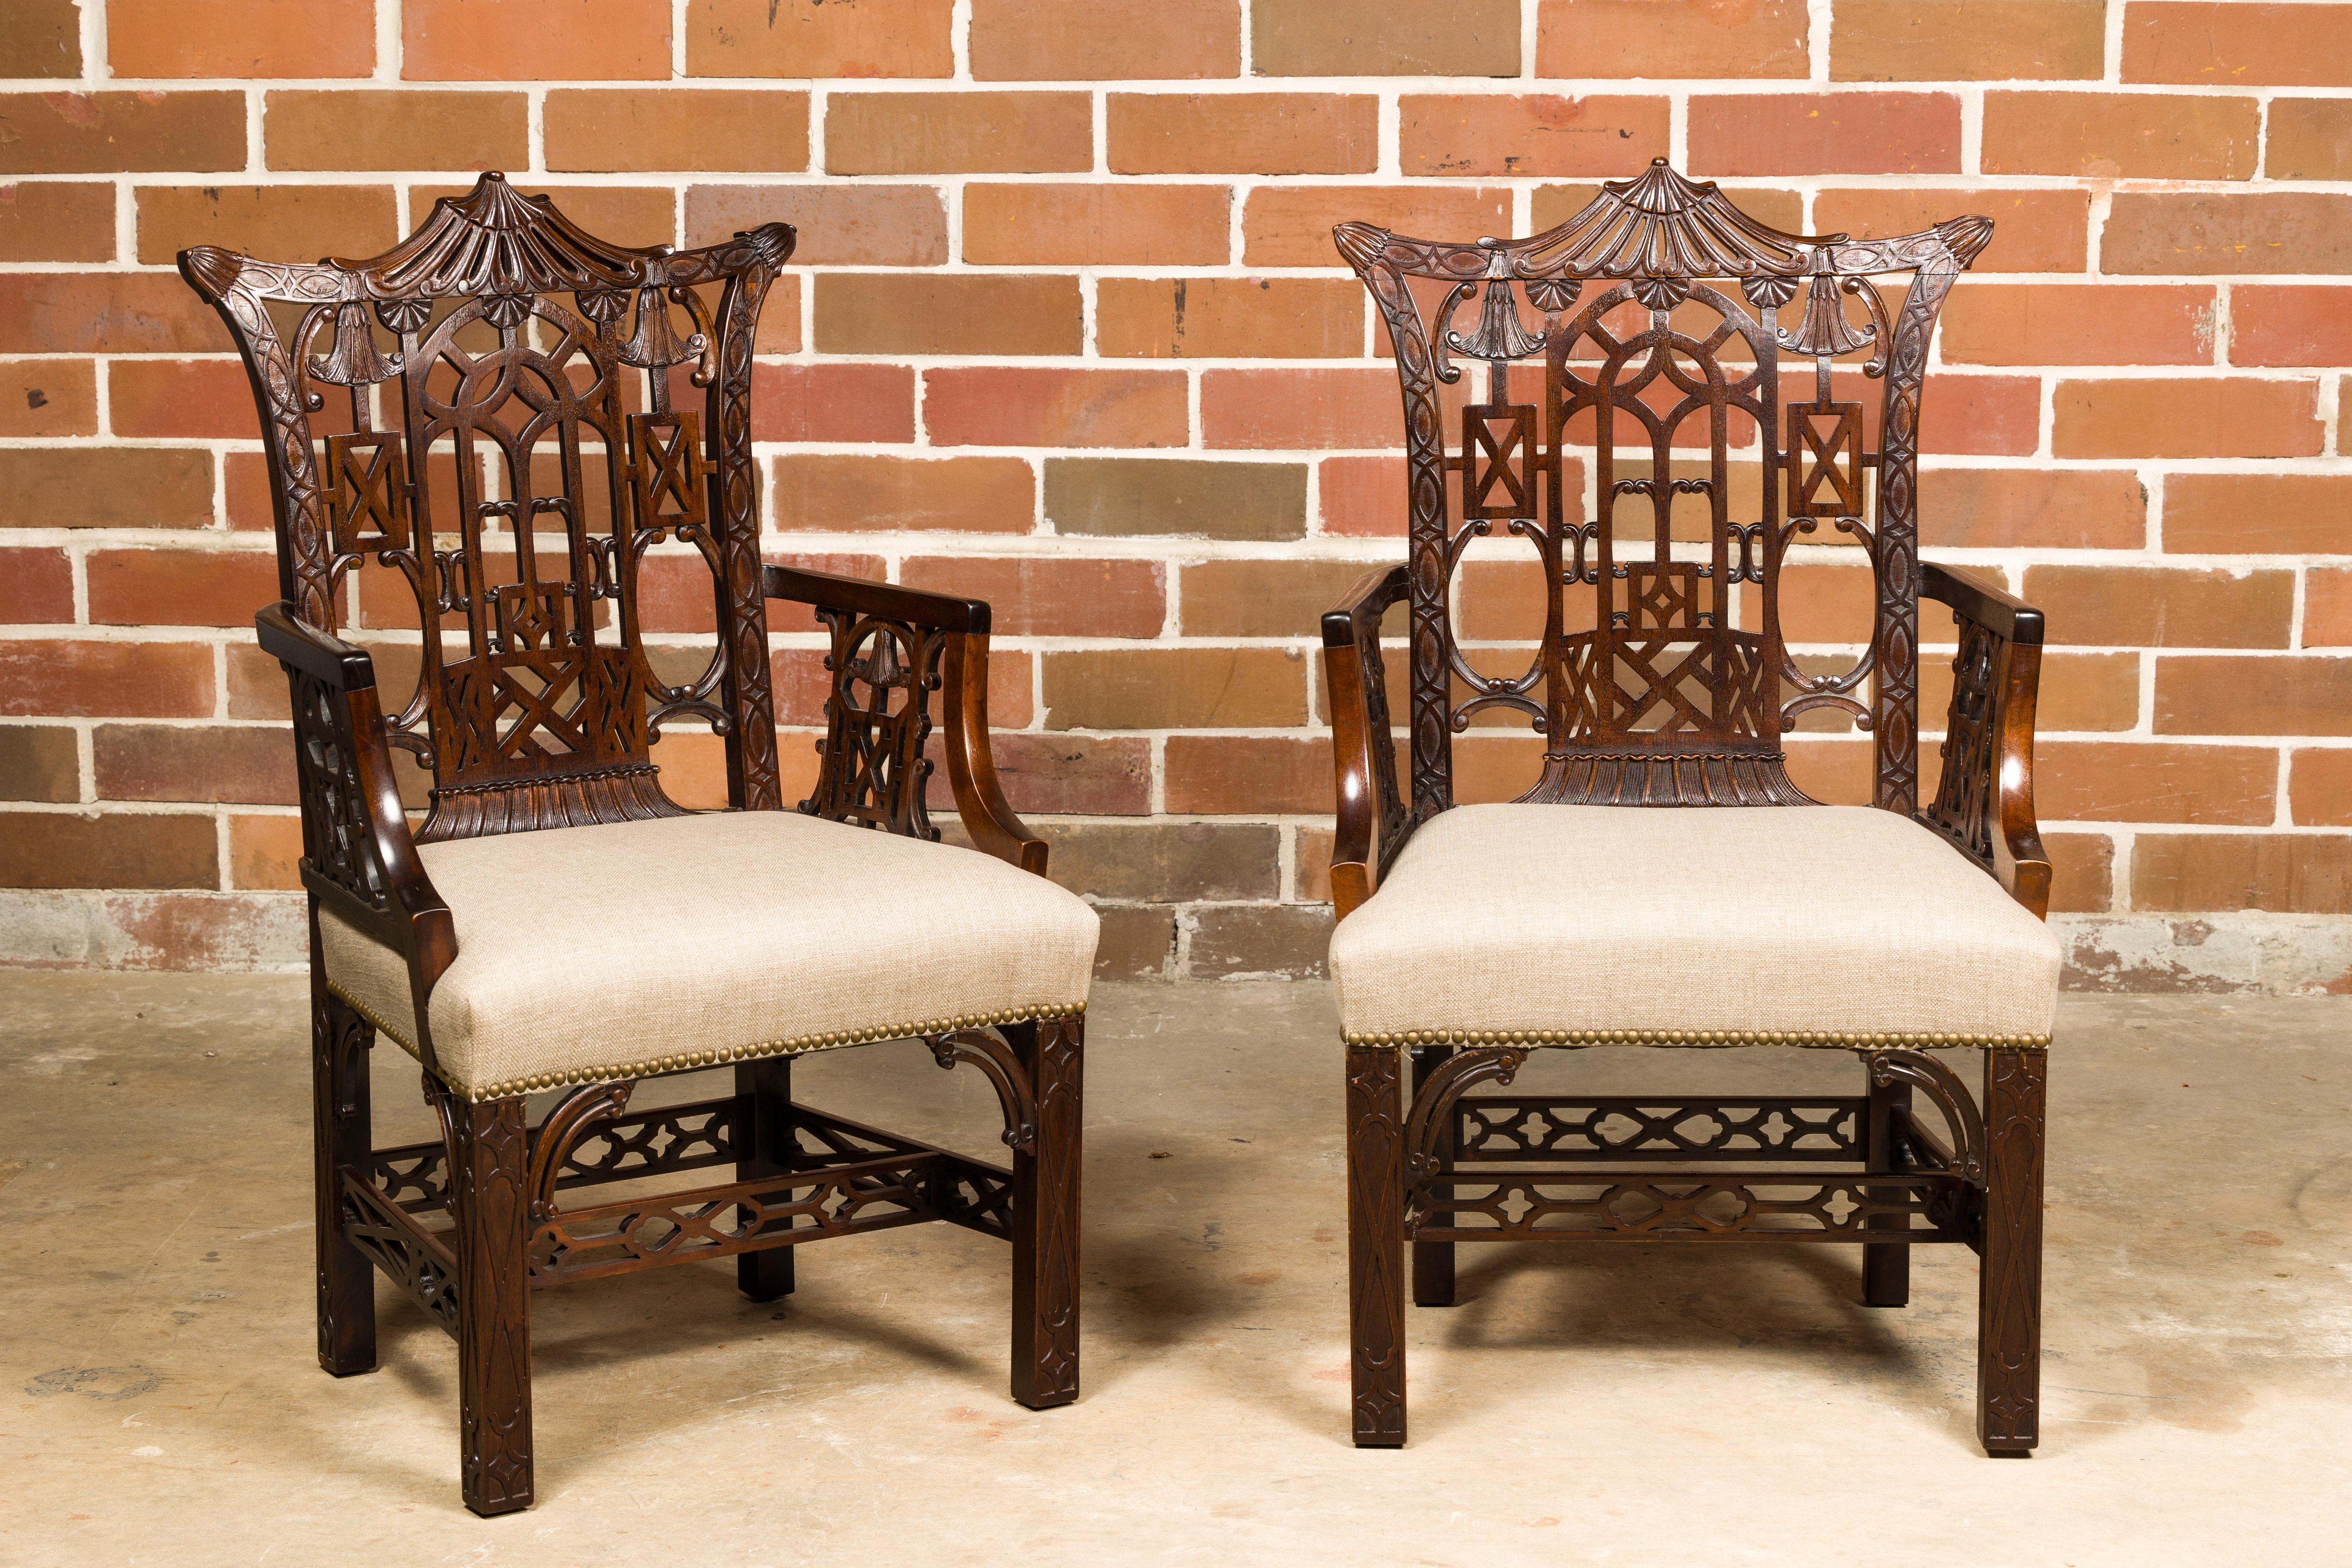 A pair of English Chippendale armchairs from the 19th century with richly carved décor and new custom linen upholstery. These English Chippendale armchairs, dating back to the 19th century, are a splendid testament to timeless elegance and